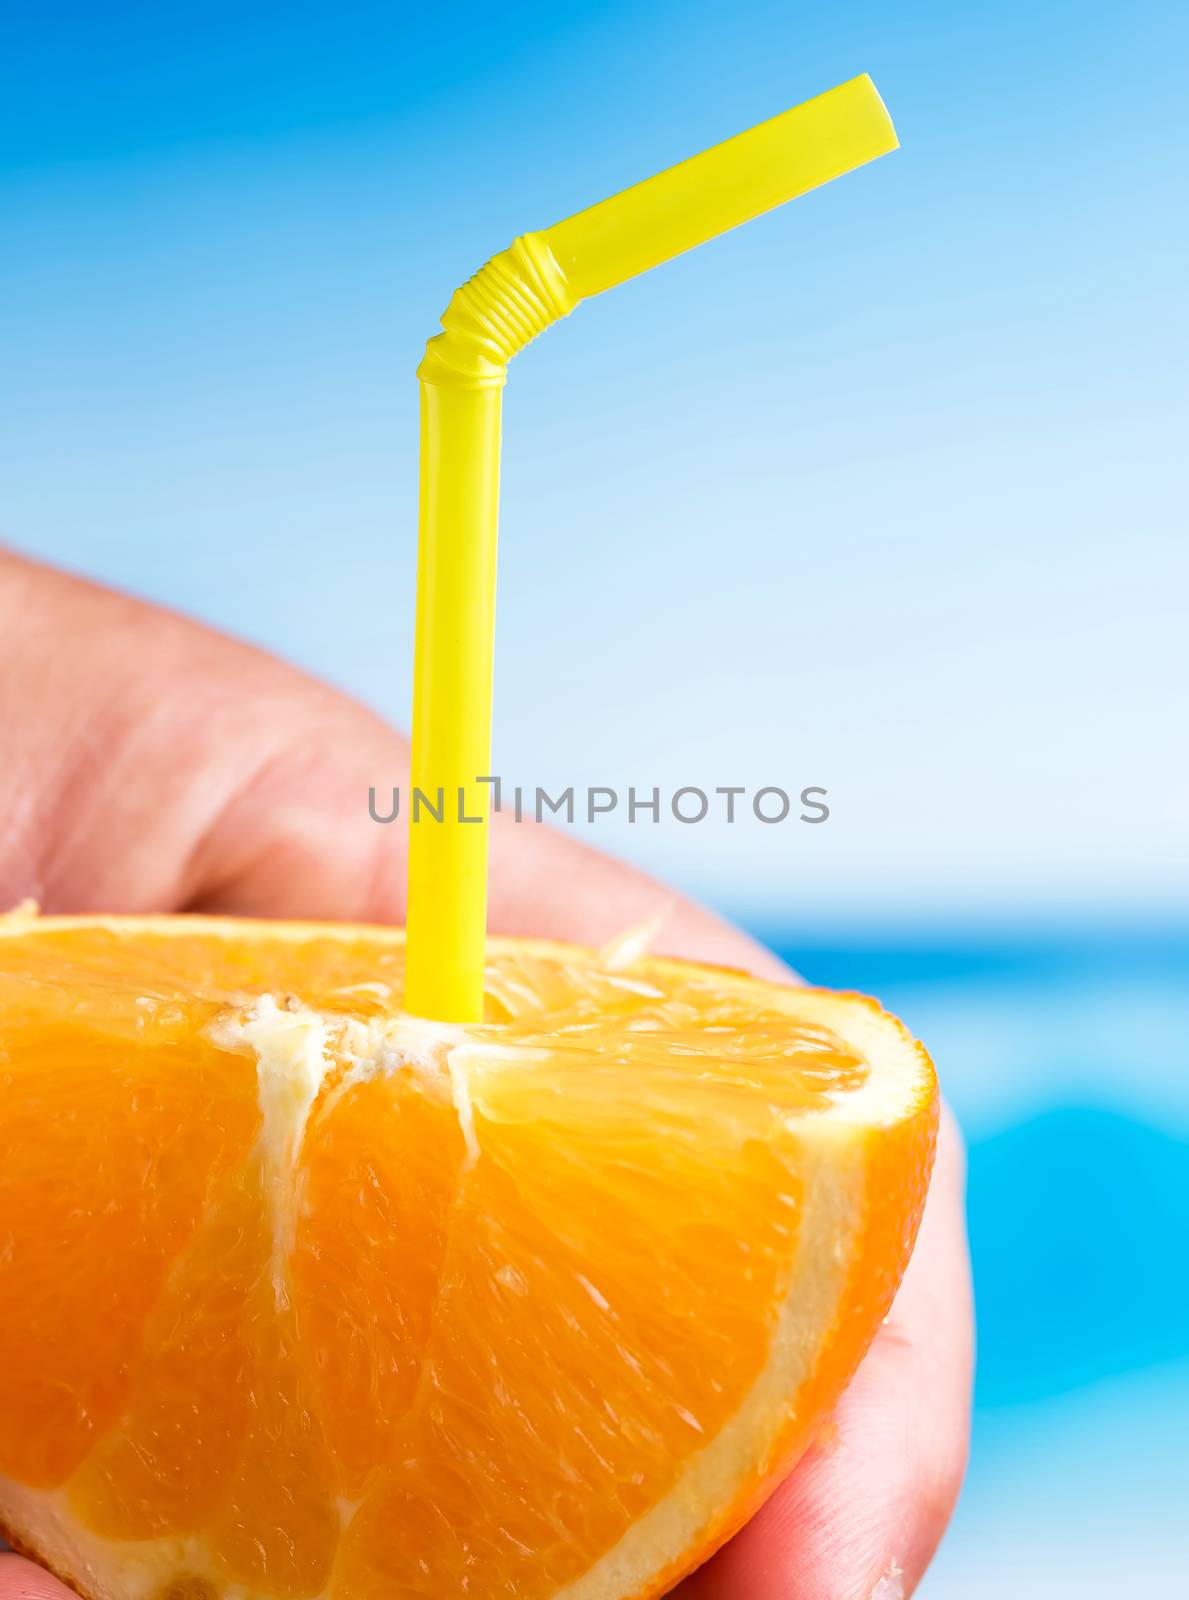 Freshly Squeezed Orange Meaning Juicy Juice And Healthy